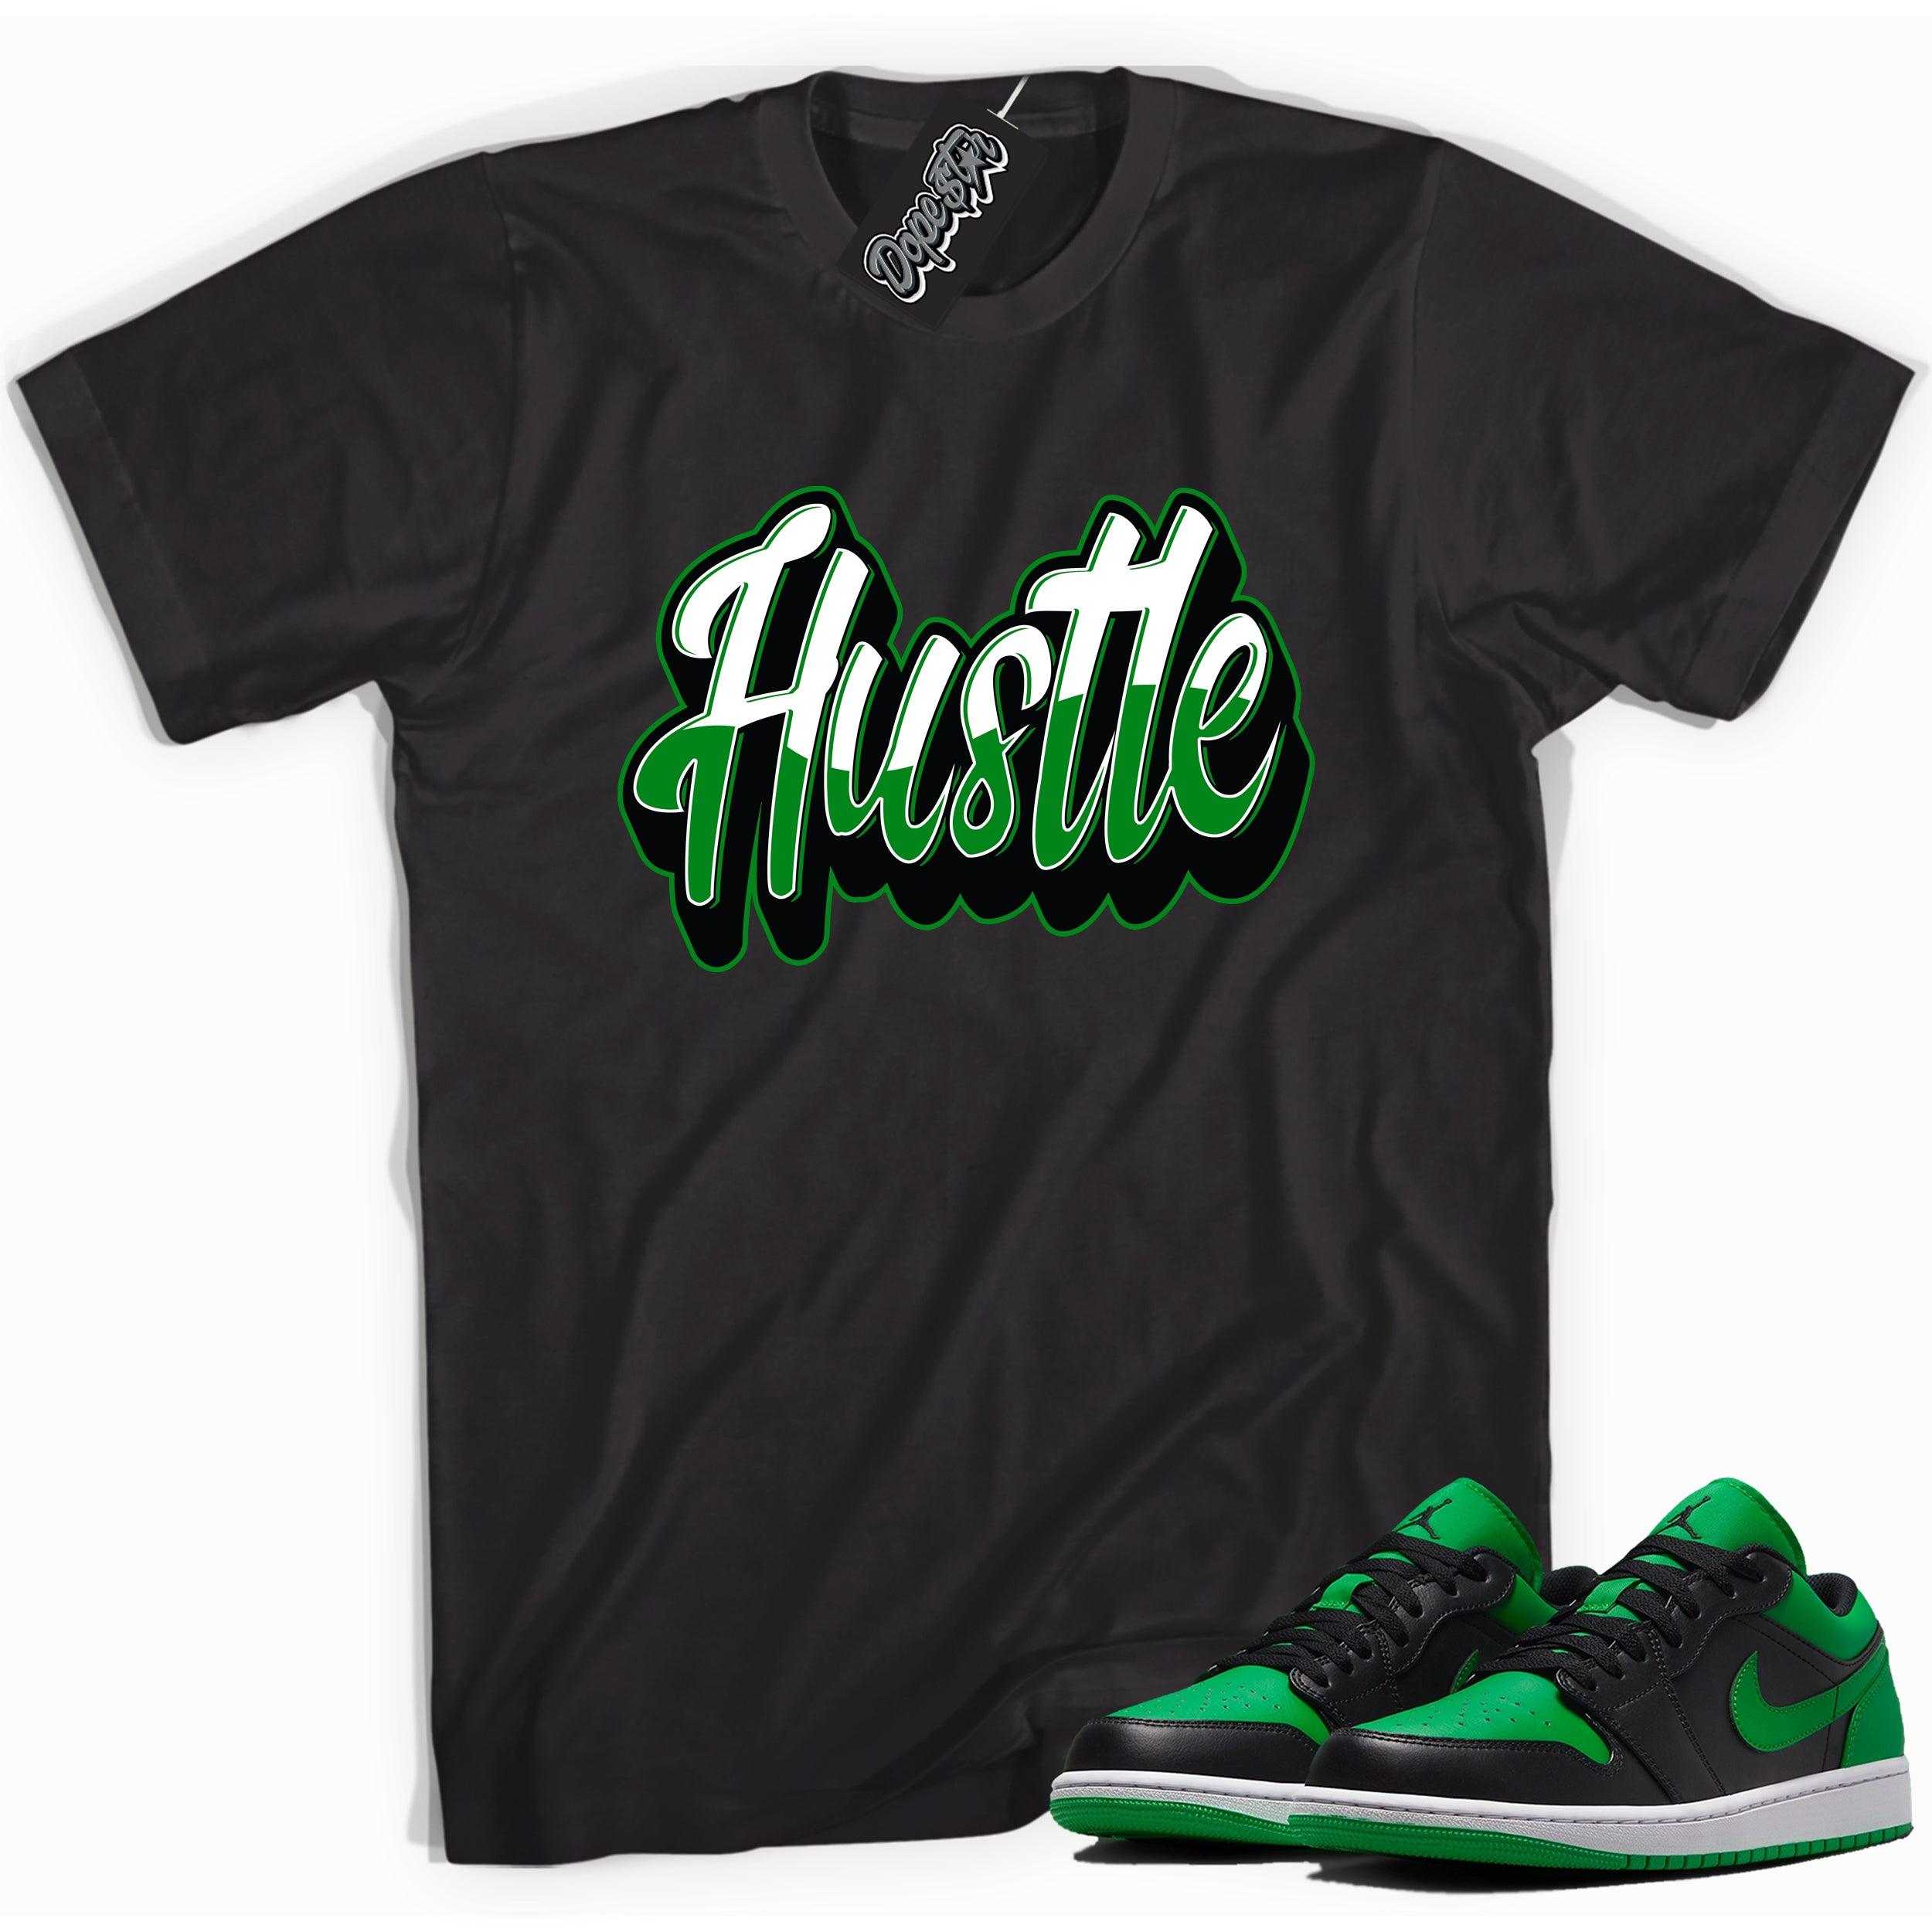 Cool black graphic tee with 'Hustle' print, that perfectly matches Air Jordan 1 Low Lucky Green sneakers